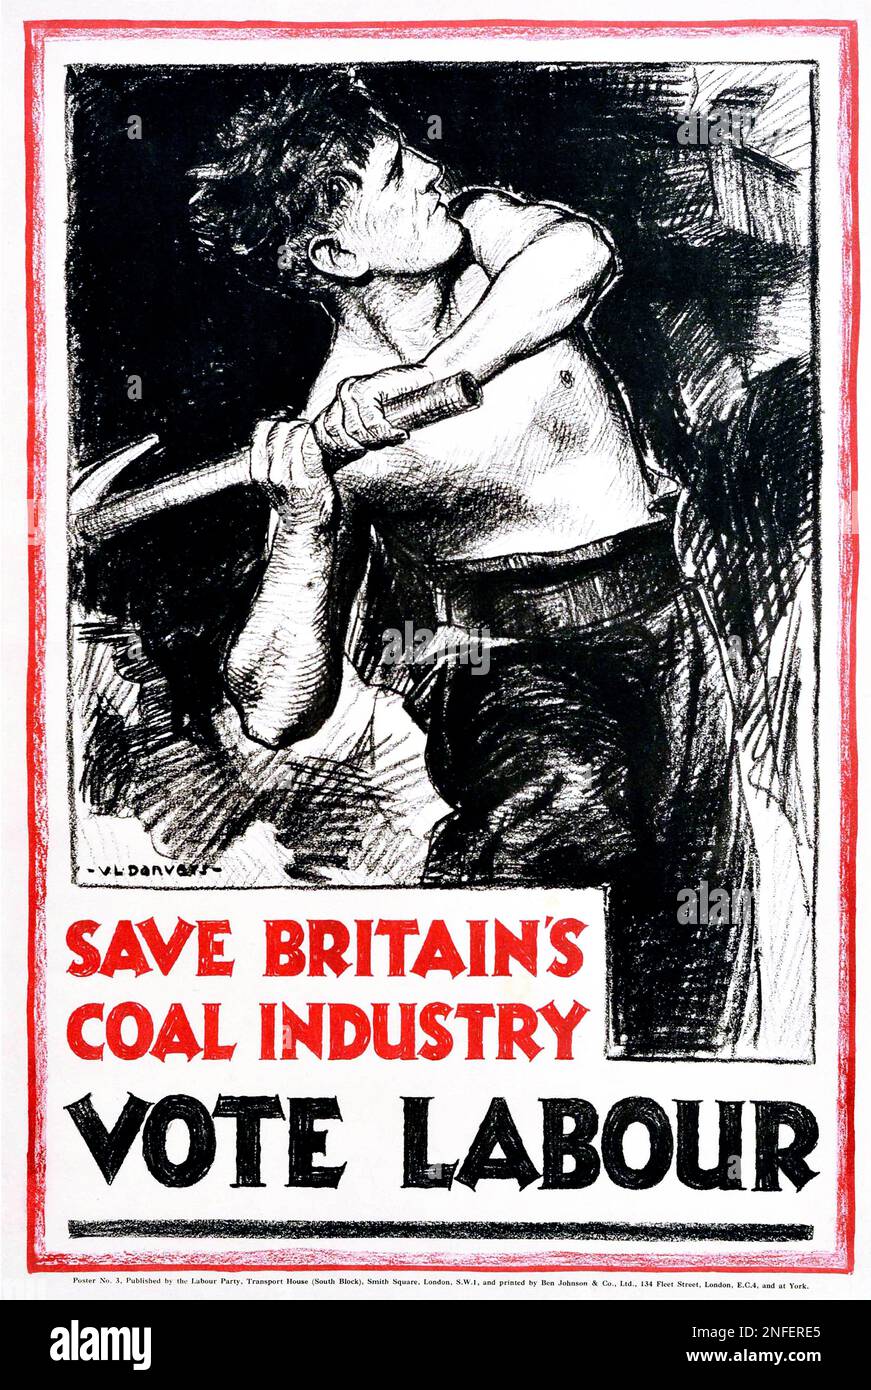 1930s British Labour Party poster - Save Britain's Coal Industry, Vote Labour Stock Photo